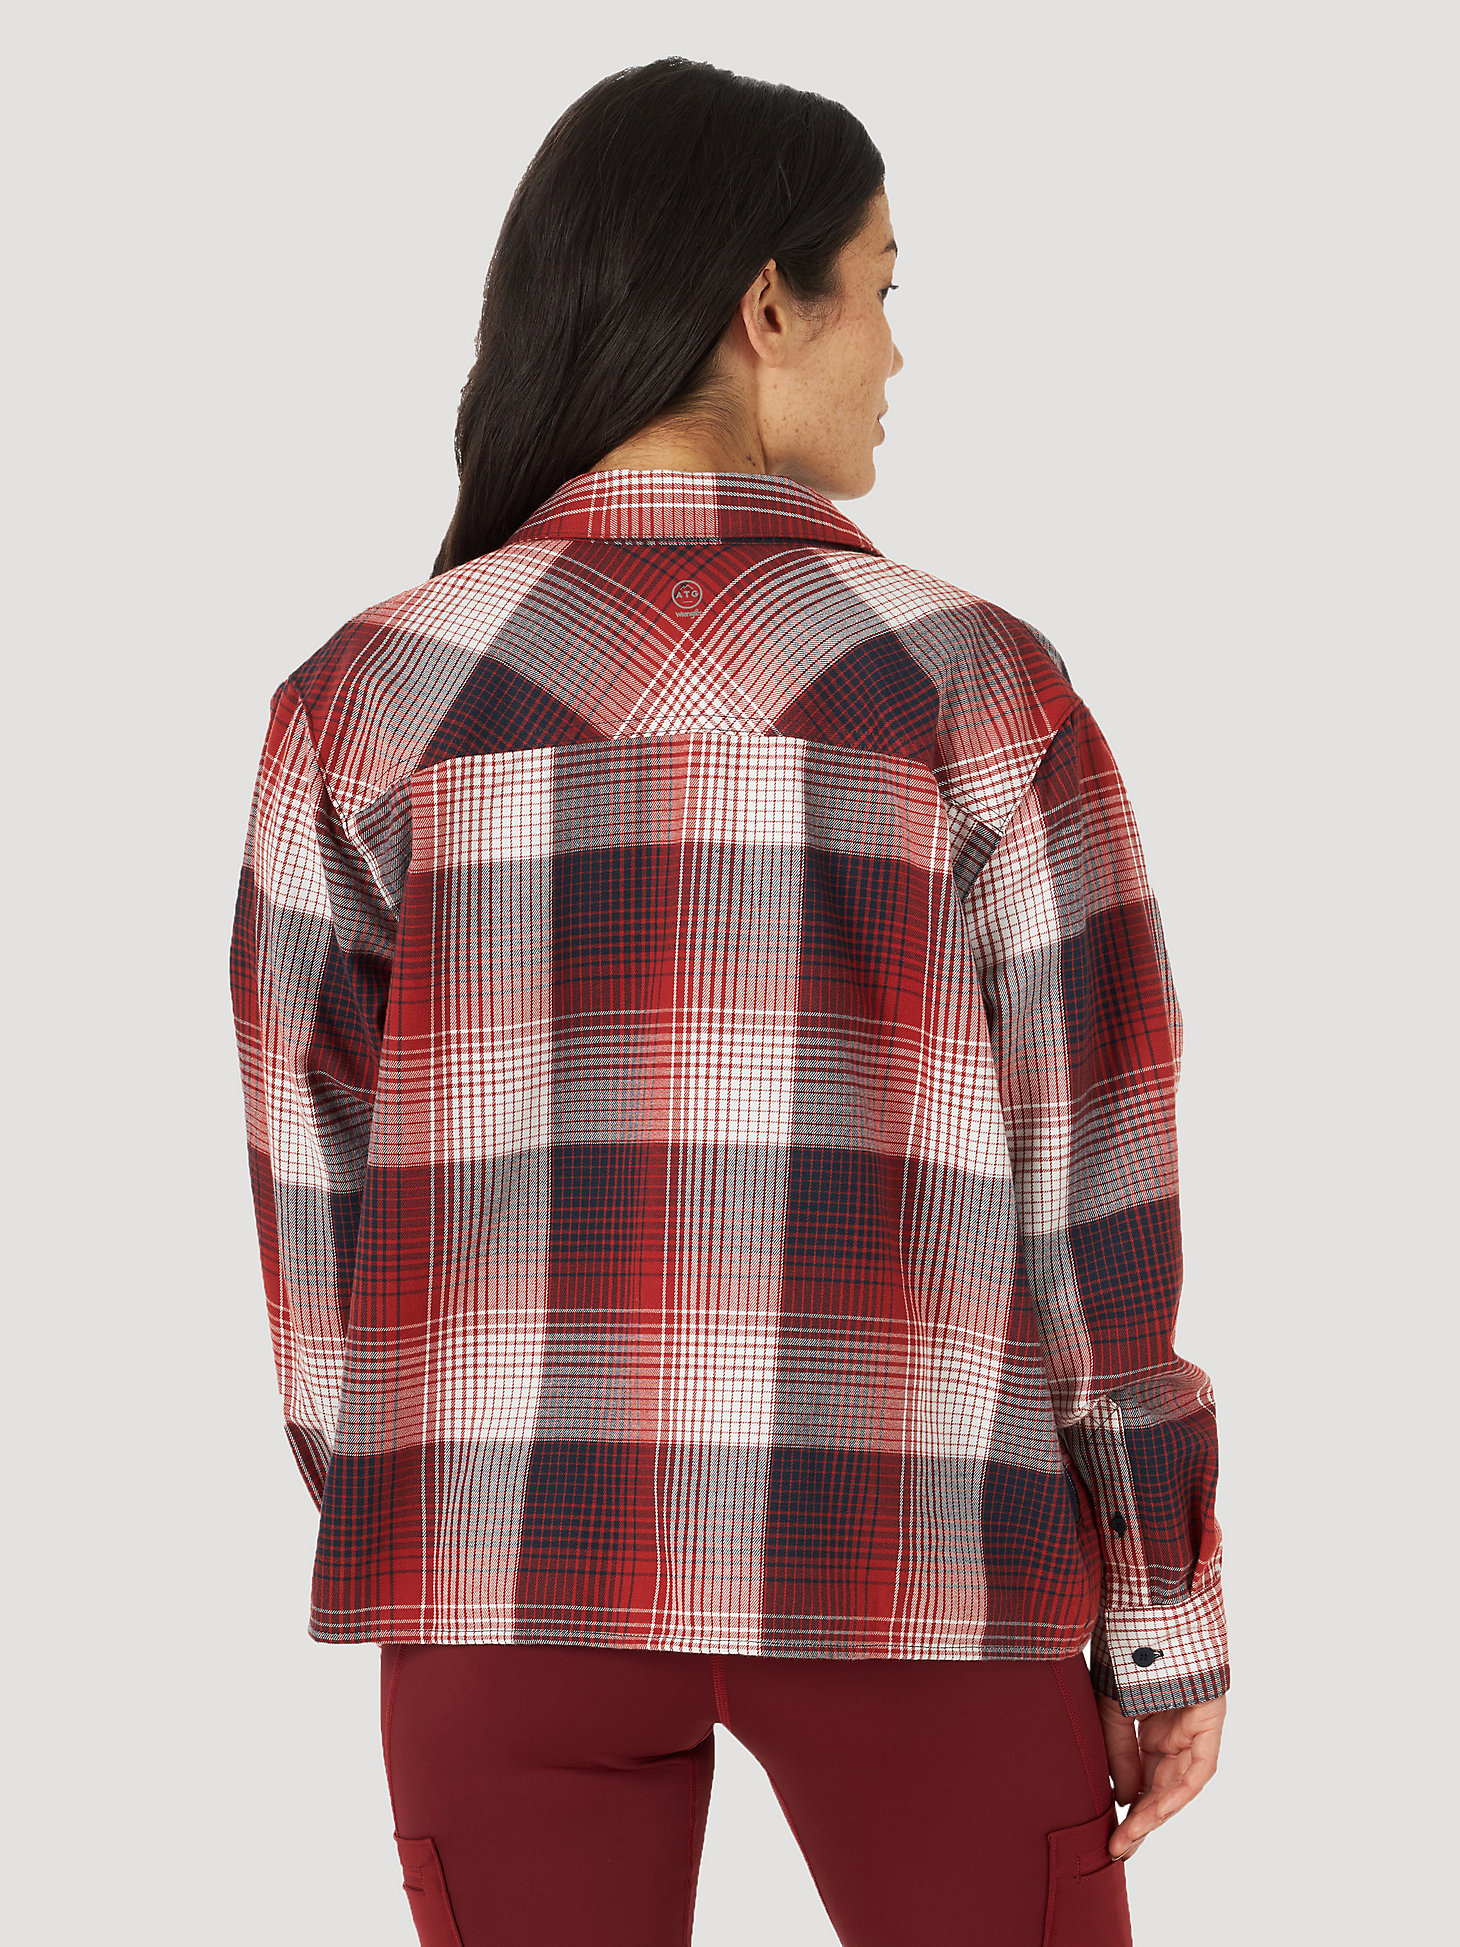 ATG By Wrangler™ Women's Relaxed Flannel Shirt in Dark Red alternative view 3